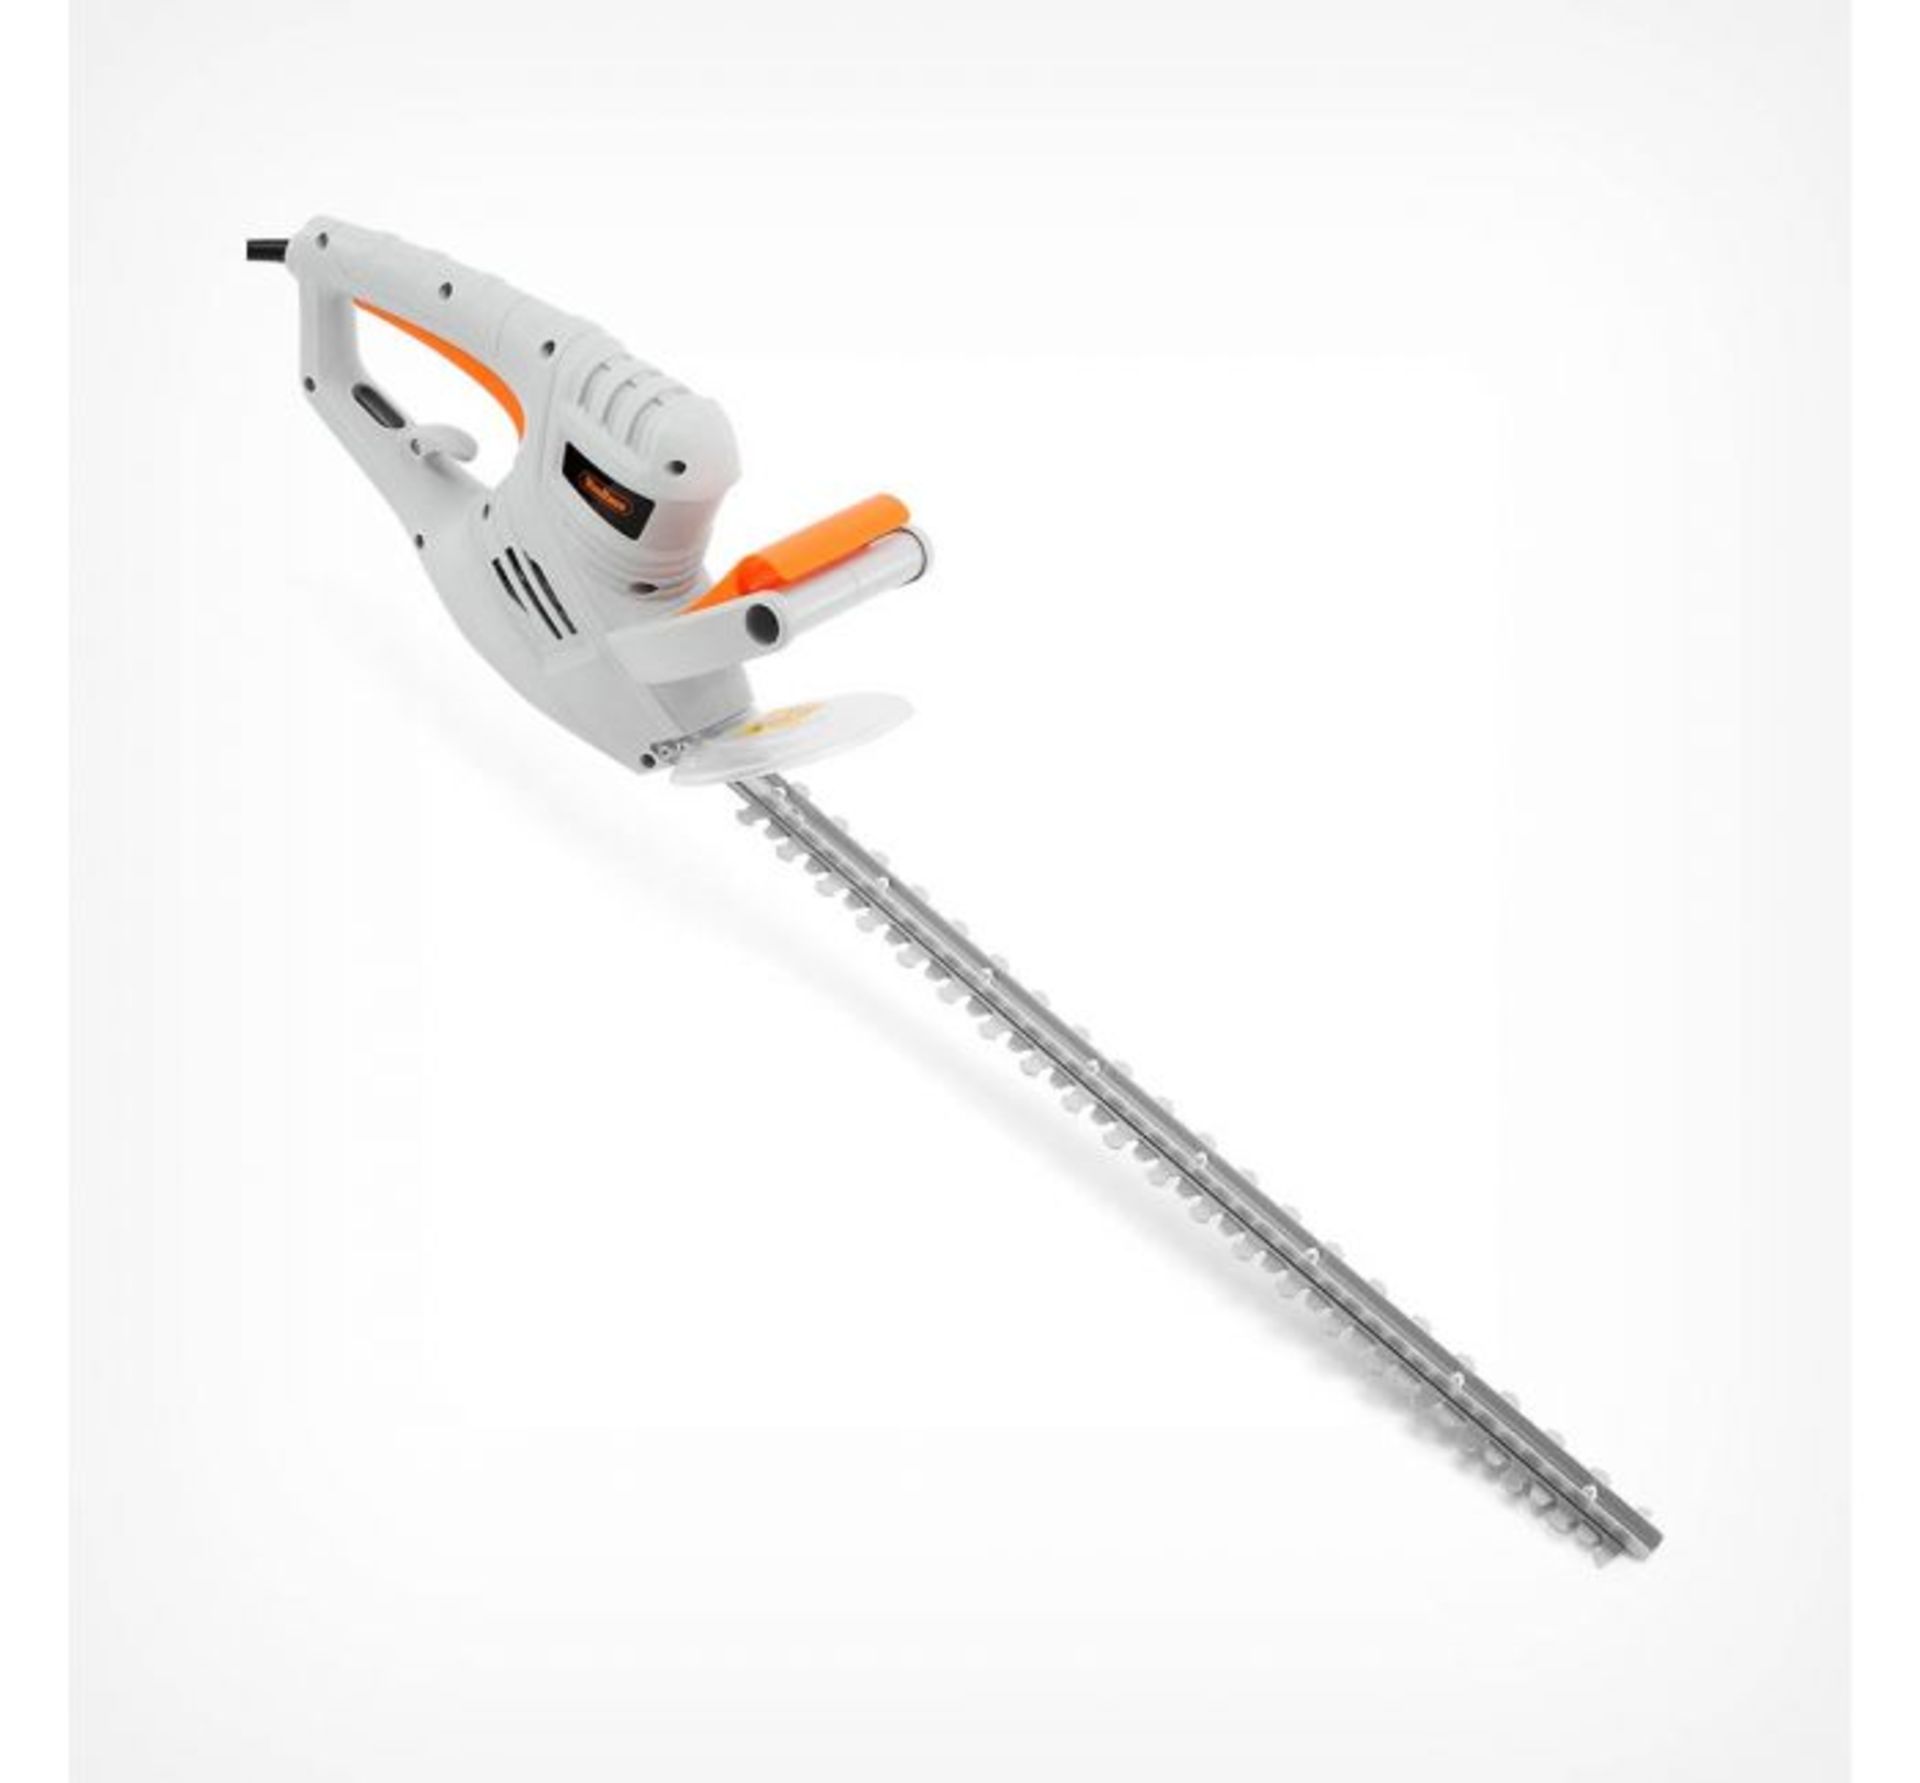 (WK11) 550W Hedge Trimmer Lightweight at only 3.2kg with a powerful 550W motor and precision b...